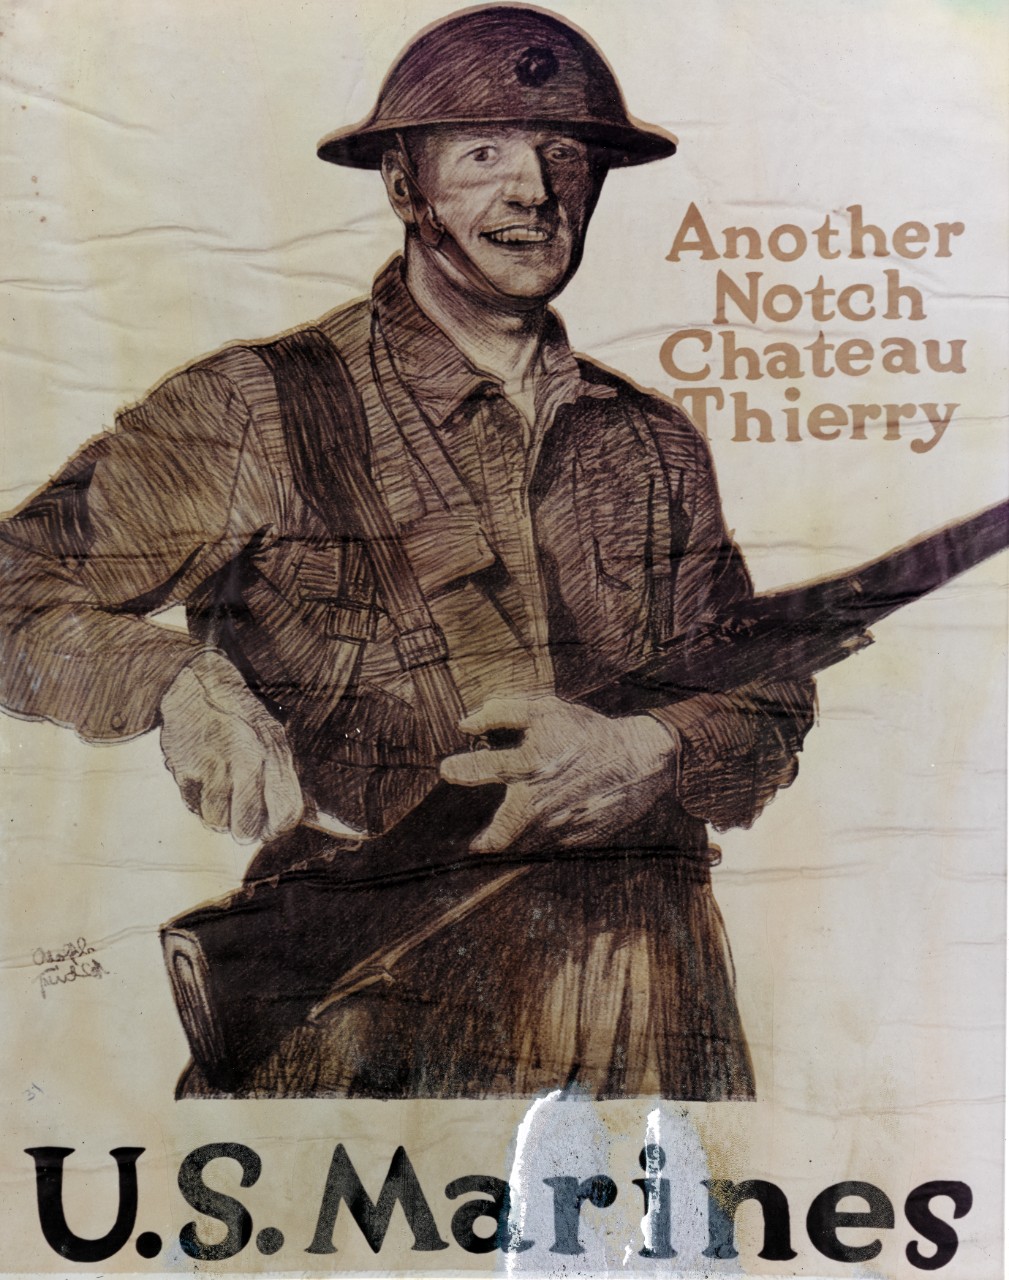 World War I recruiting posters